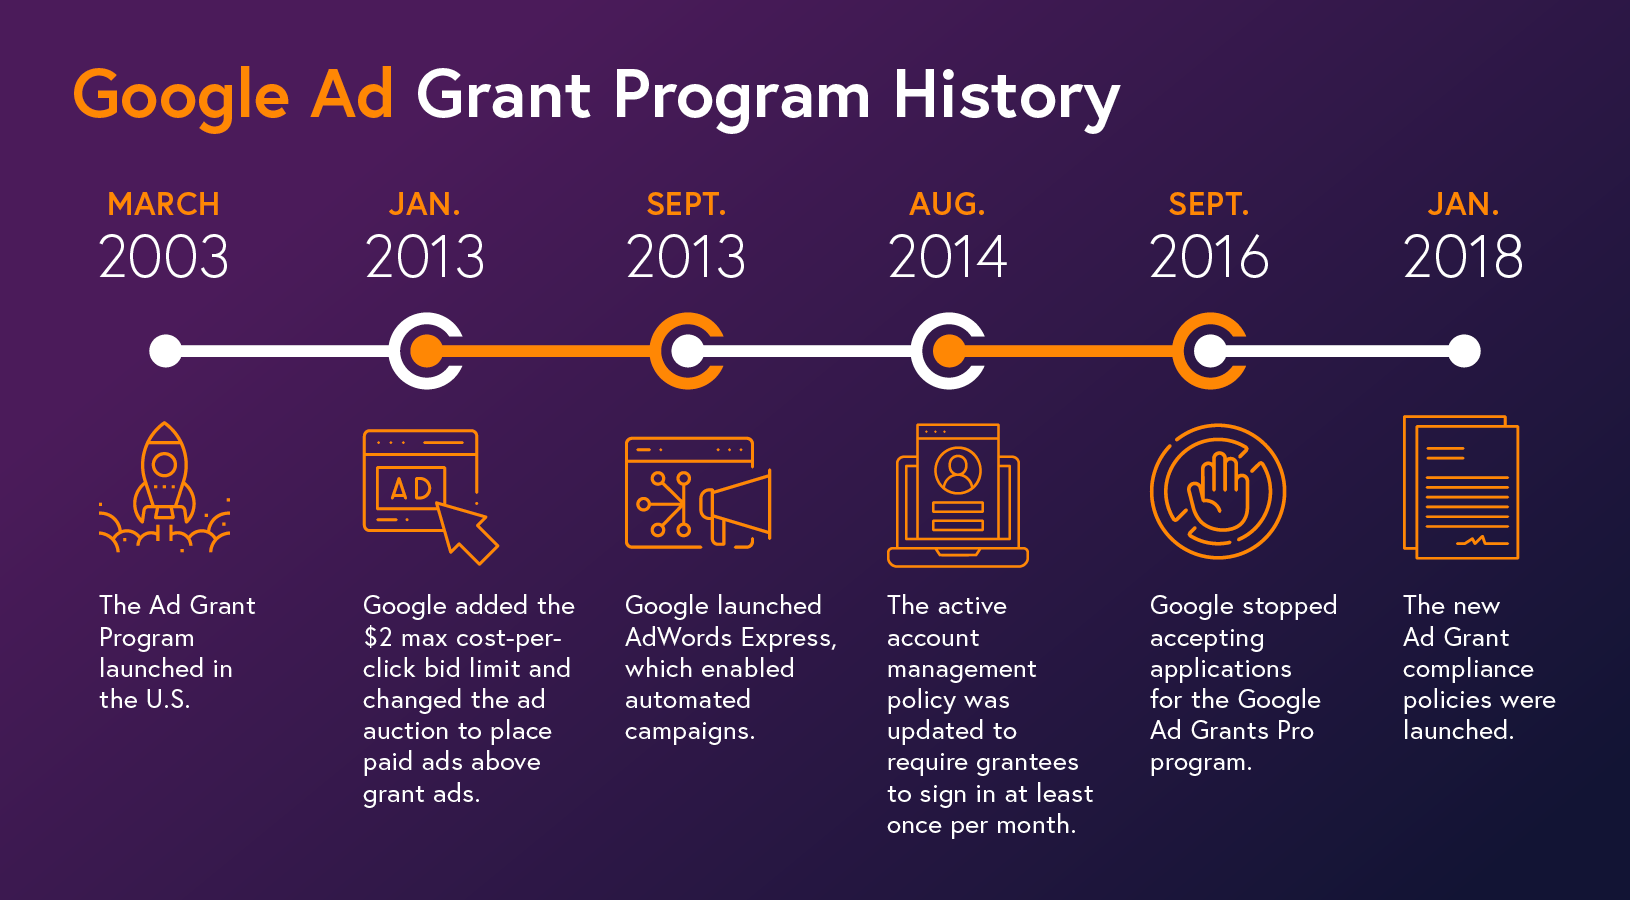 This timelines outlines the changes made to the Google Ad Grants program over the years.